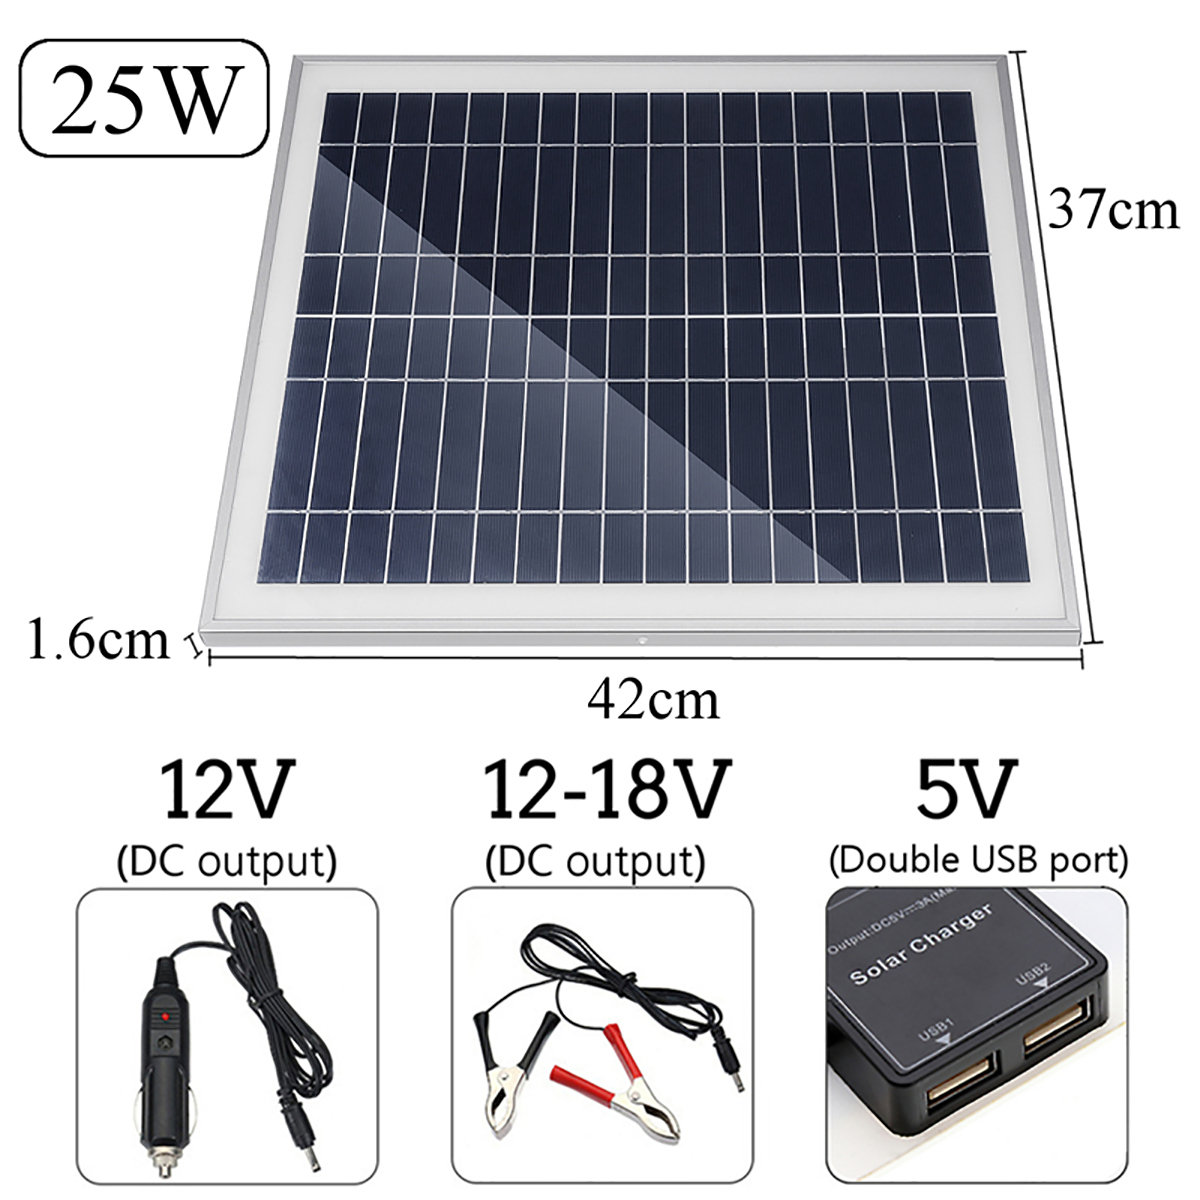 25W-Portable-Solar-Panel-Kit-DC-USB-Charging-Double-USB-Port-Suction-Cups-Camping-Traveling-1383680-1